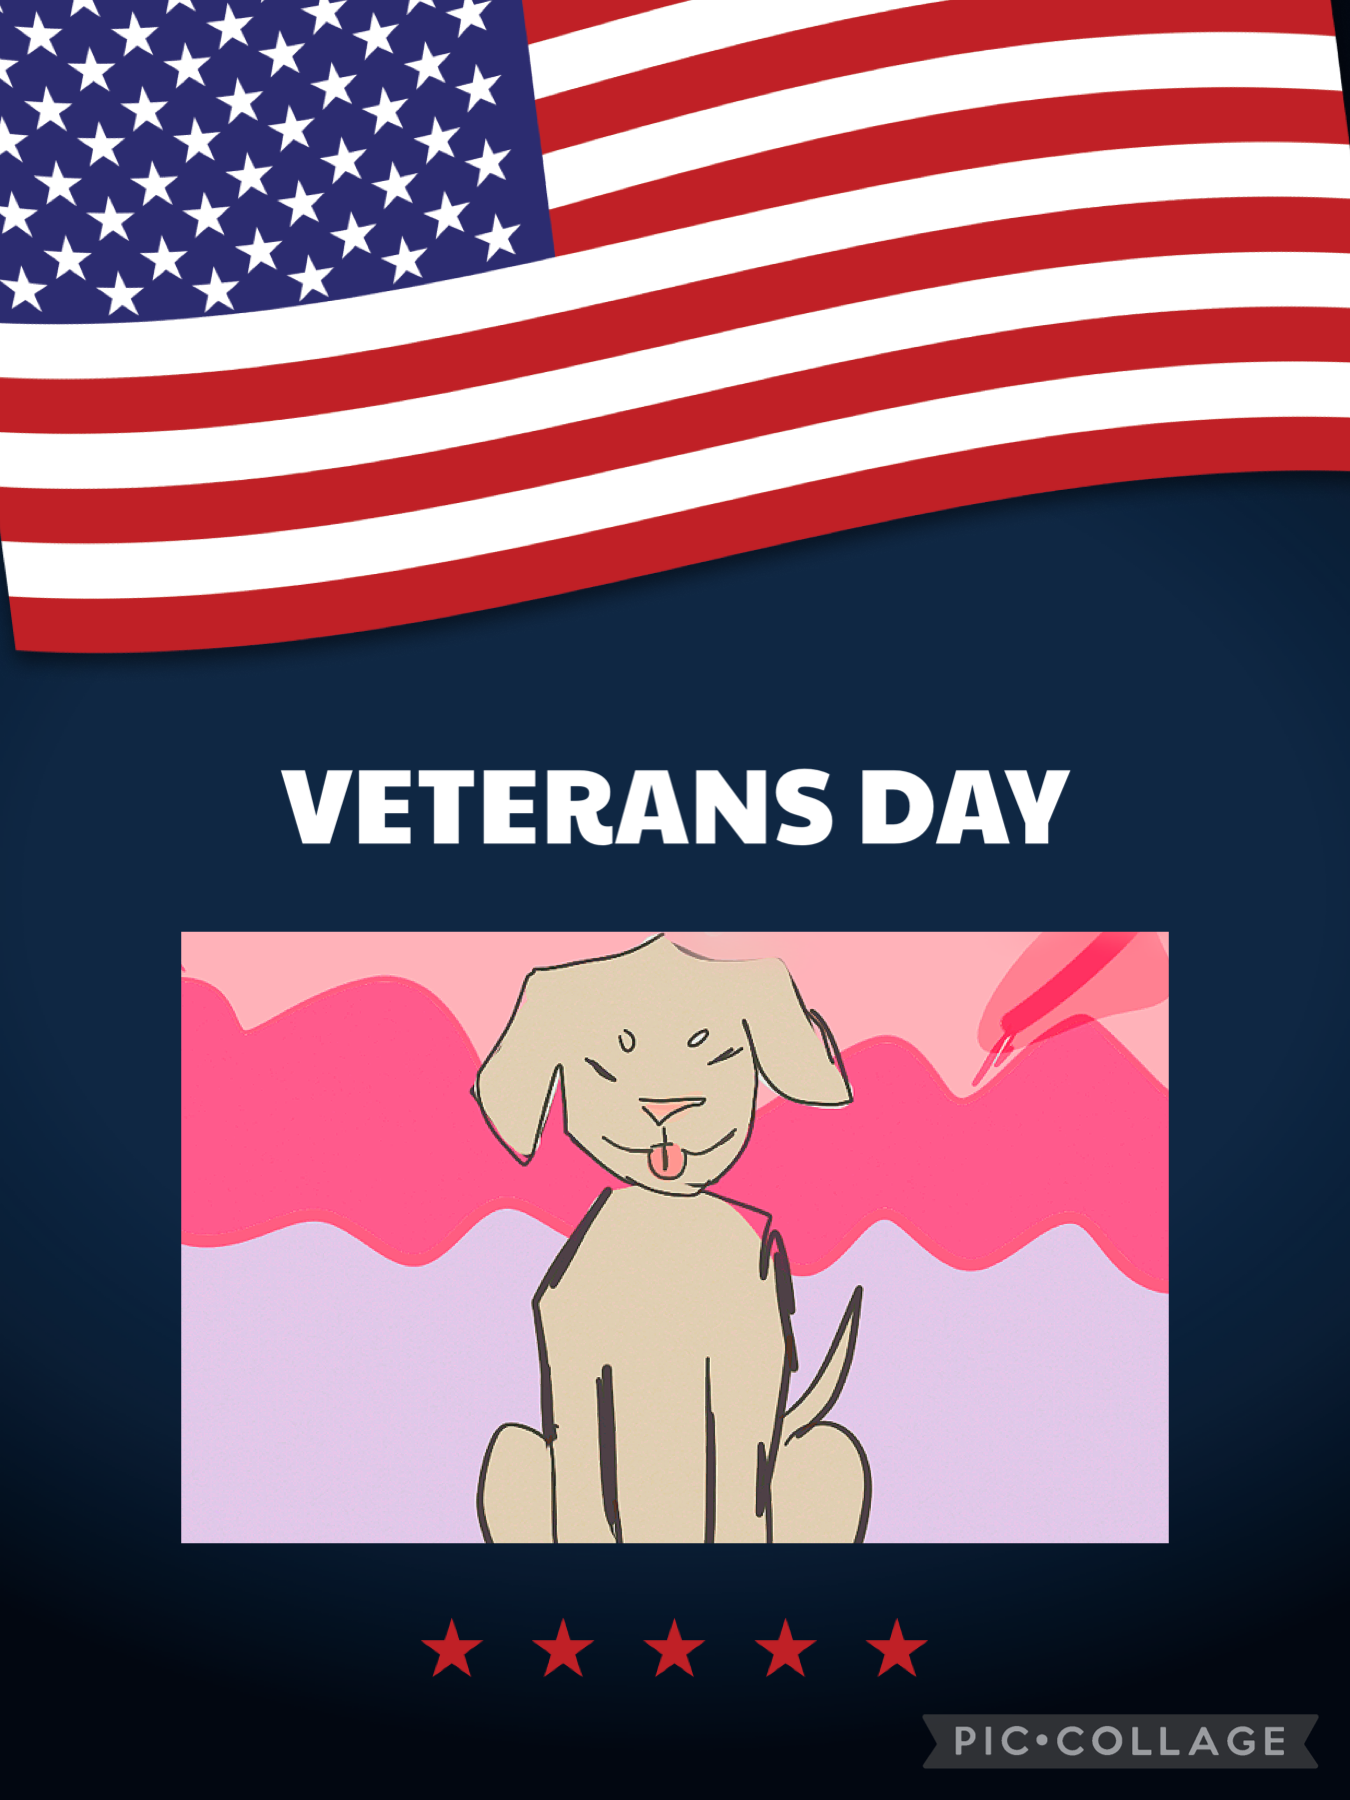 Sorry for not posting guys. I am way to busy for weekdays :(
But.. I can post weekends. In the meantime, here’s a Veterans Day celebration for Saturday. Thanks for standing by haha 